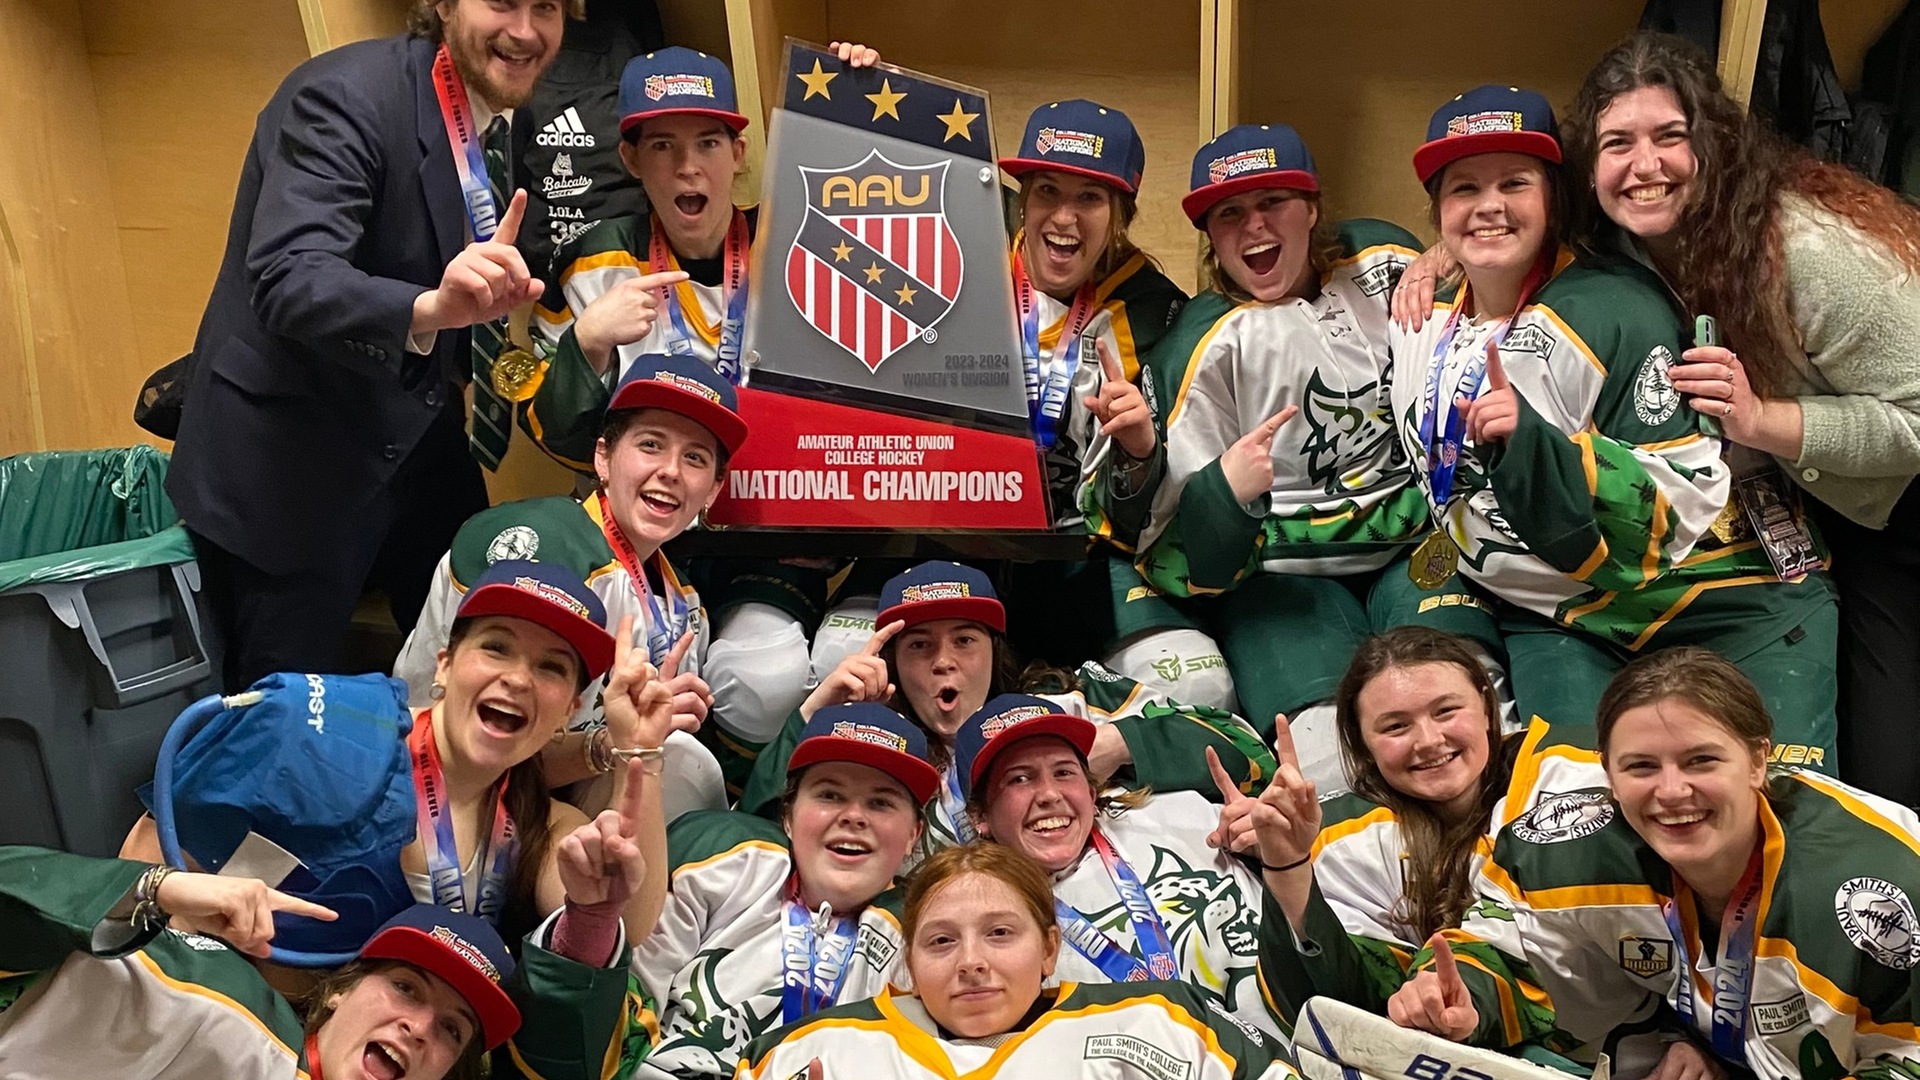 The Paul Smith's College women's hockey team celebrates after winning the 2024 AAU College Hockey Women's National Championship. Thumbnail